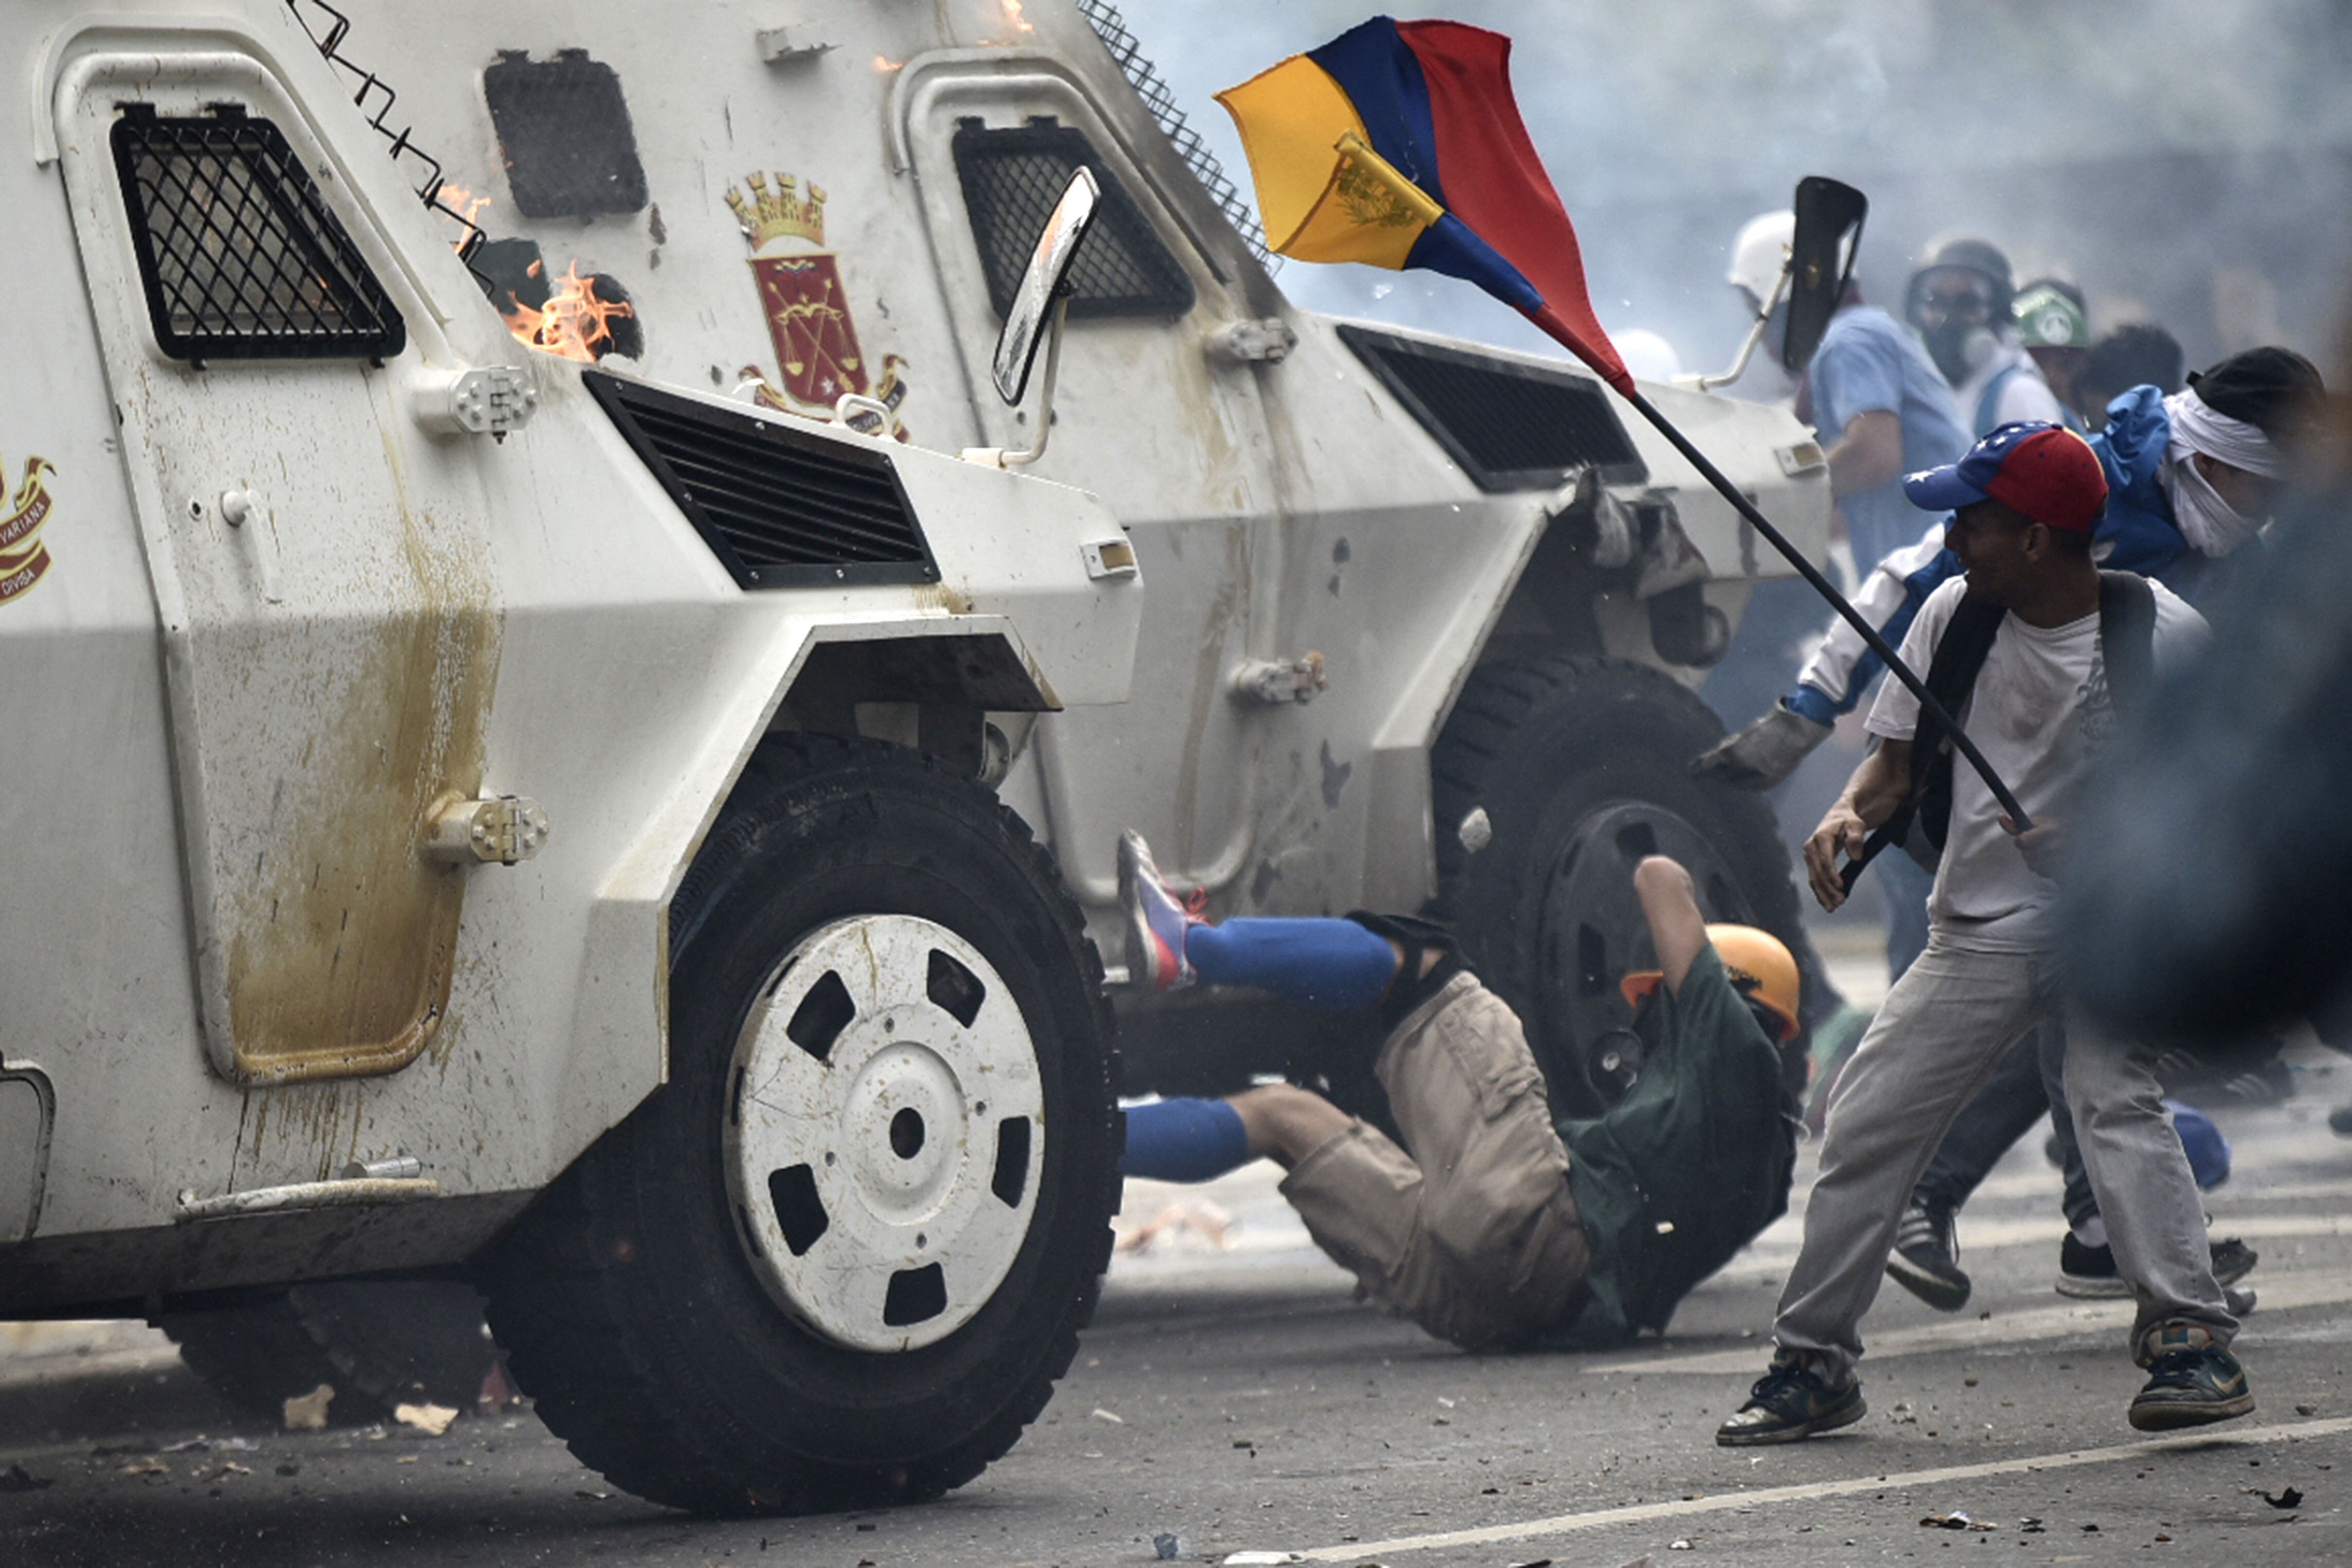 A Bolivarian National Guard riot vehicle knocks down a protester during a protest against Venezuelan President Nicolás Maduro, on May 3, 2017. (Photo by Carlos BECERRA/AFP).